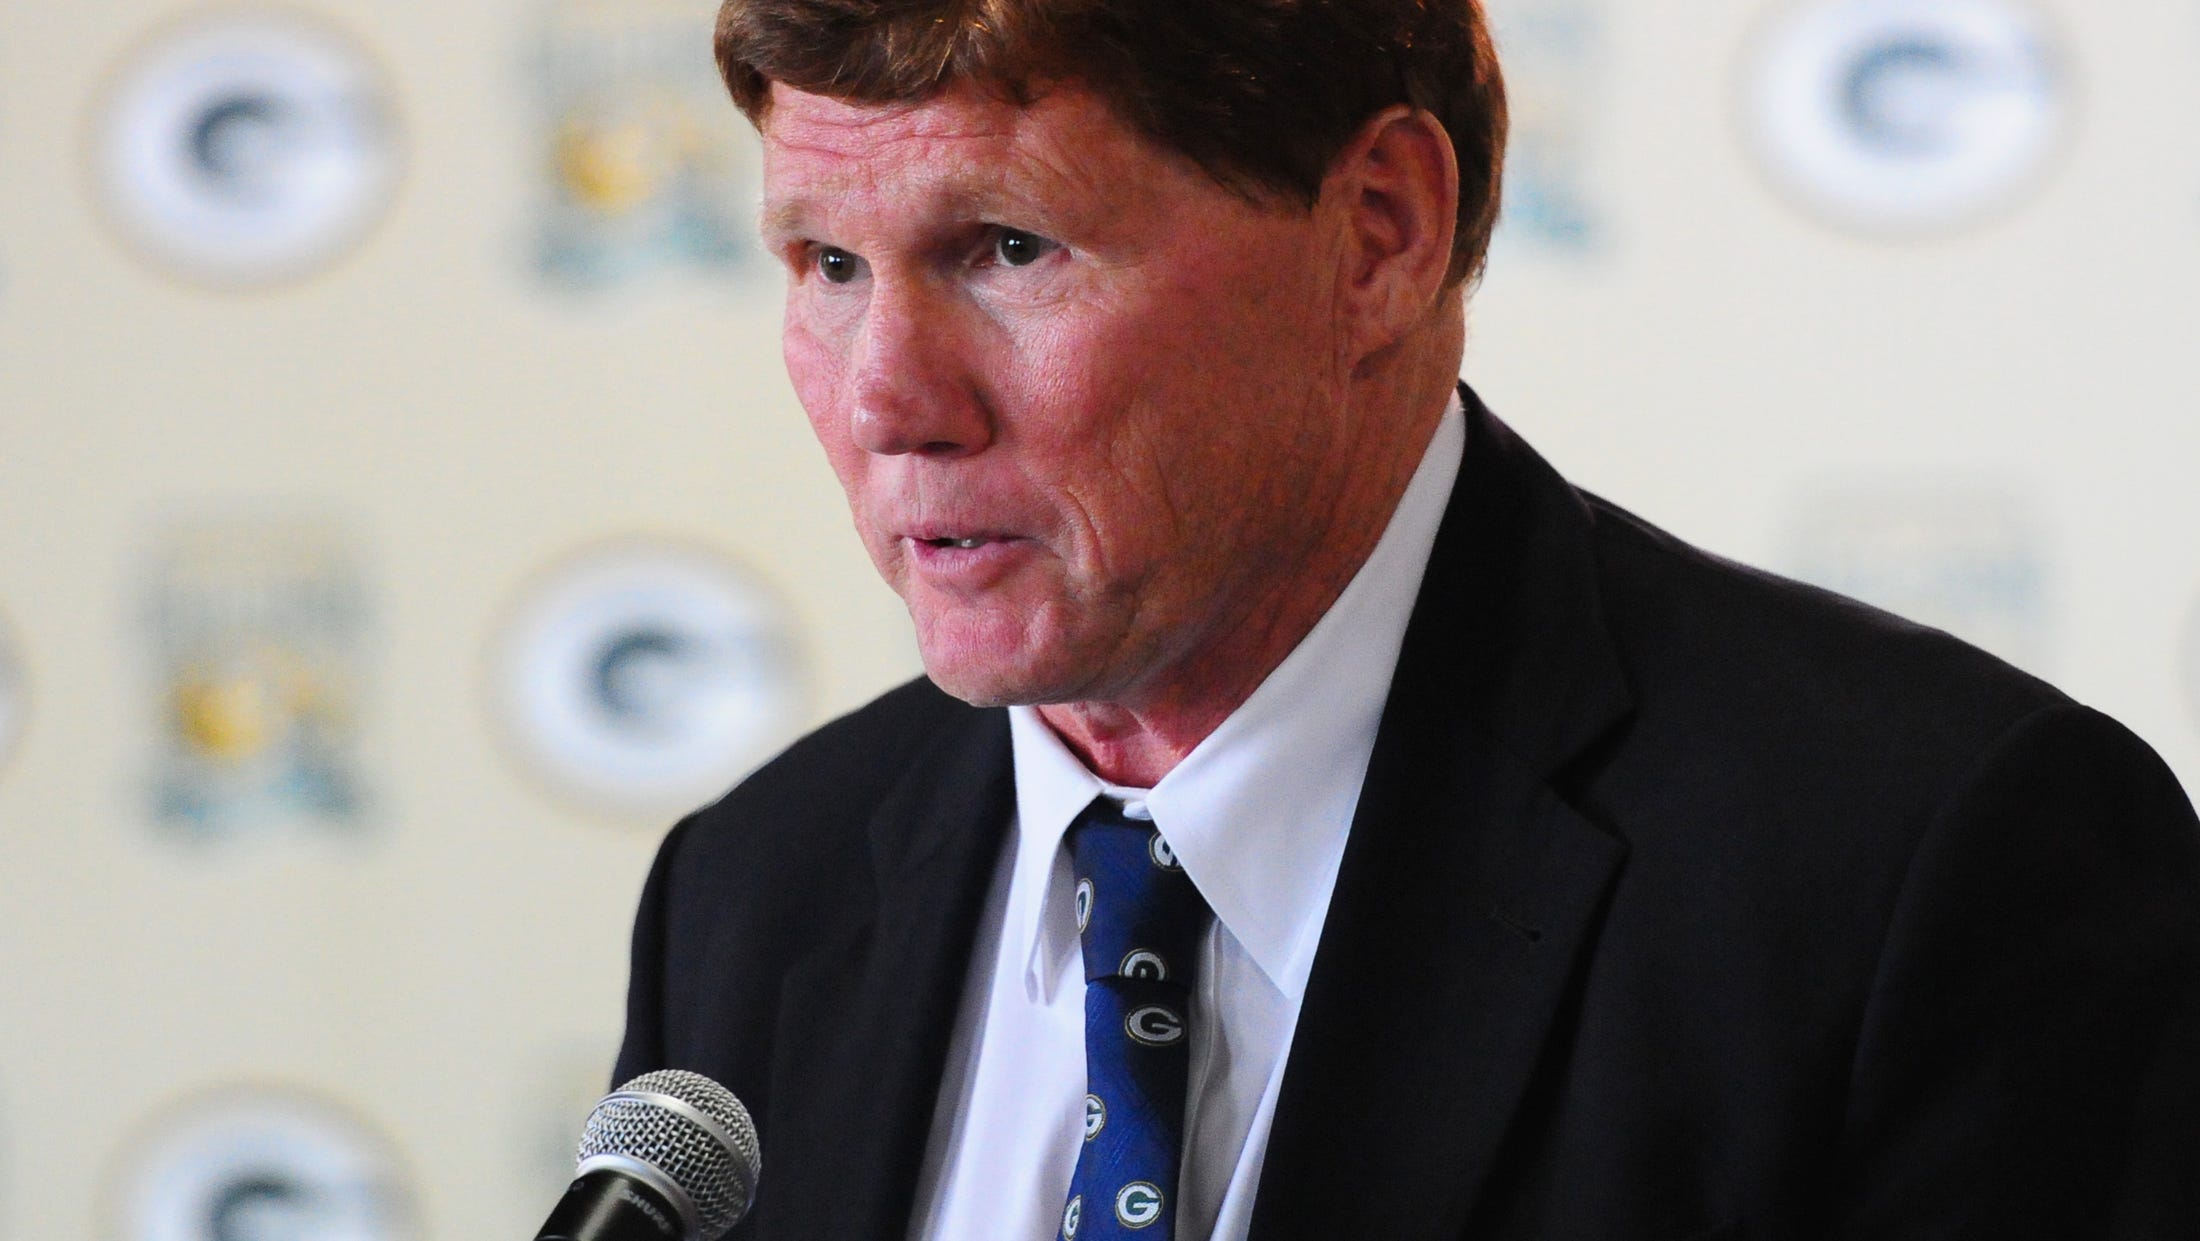 Green Bay Packers president/CEO Mark Murphy announces during a news conference at Lambeau Field on Monday, Aug. 4, 2014, that former Packers quarterback Brett Favre's name and No. 4 will be unveiled inside Lambeau Field during a game in the fall of 2015.